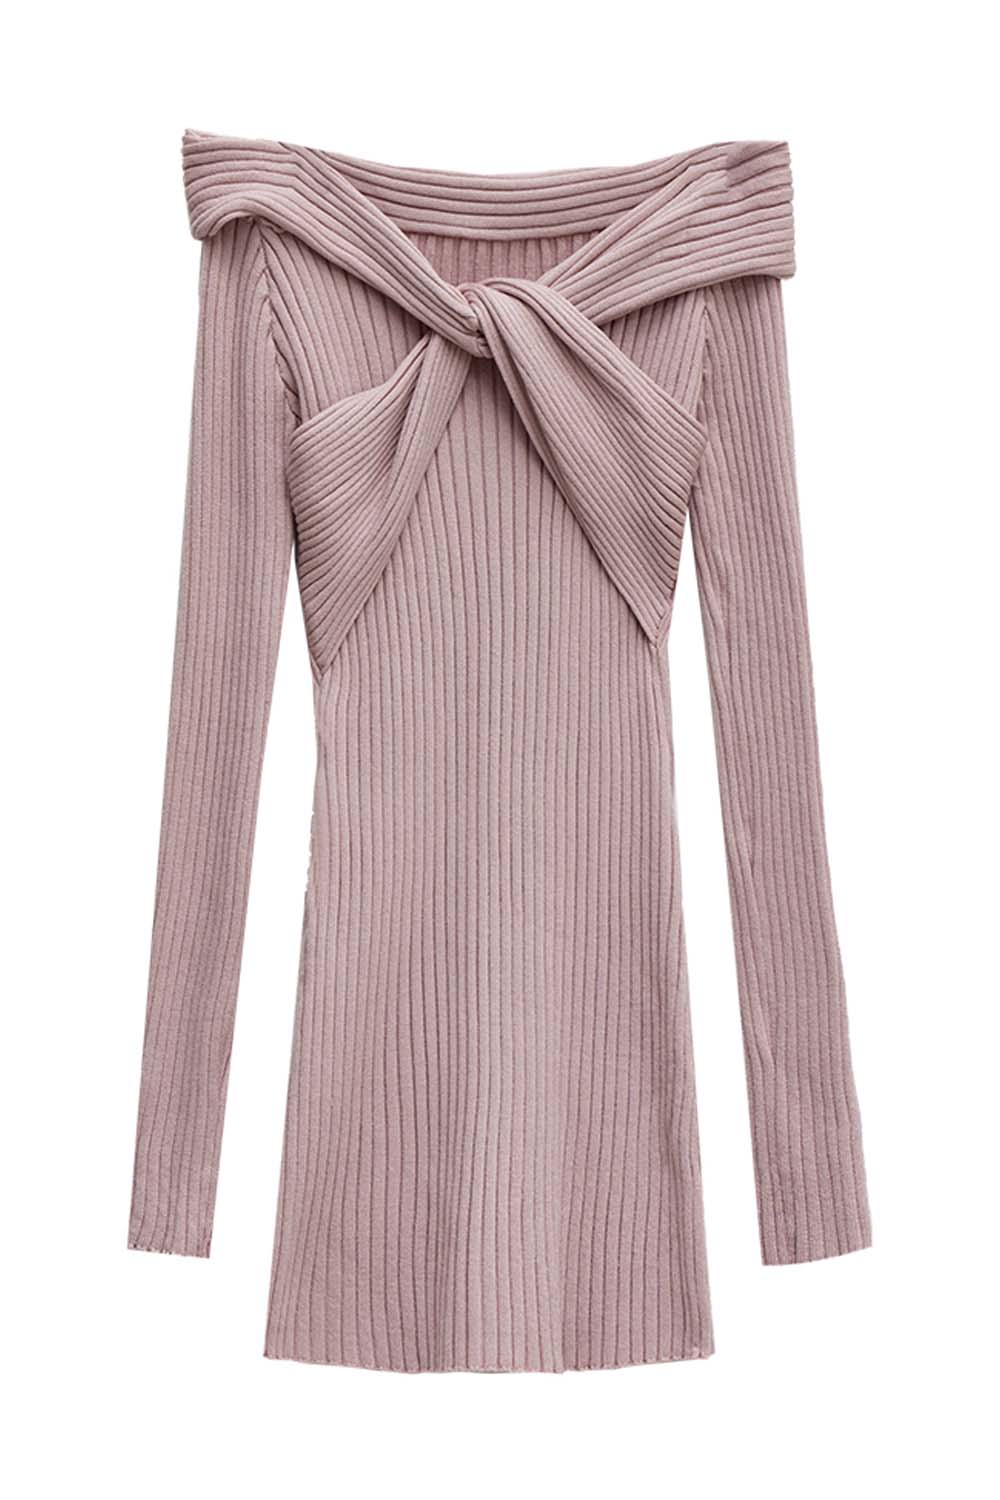 Women's Off-Shoulder Ribbed Knit Sweater Dress with Front Knot Detail